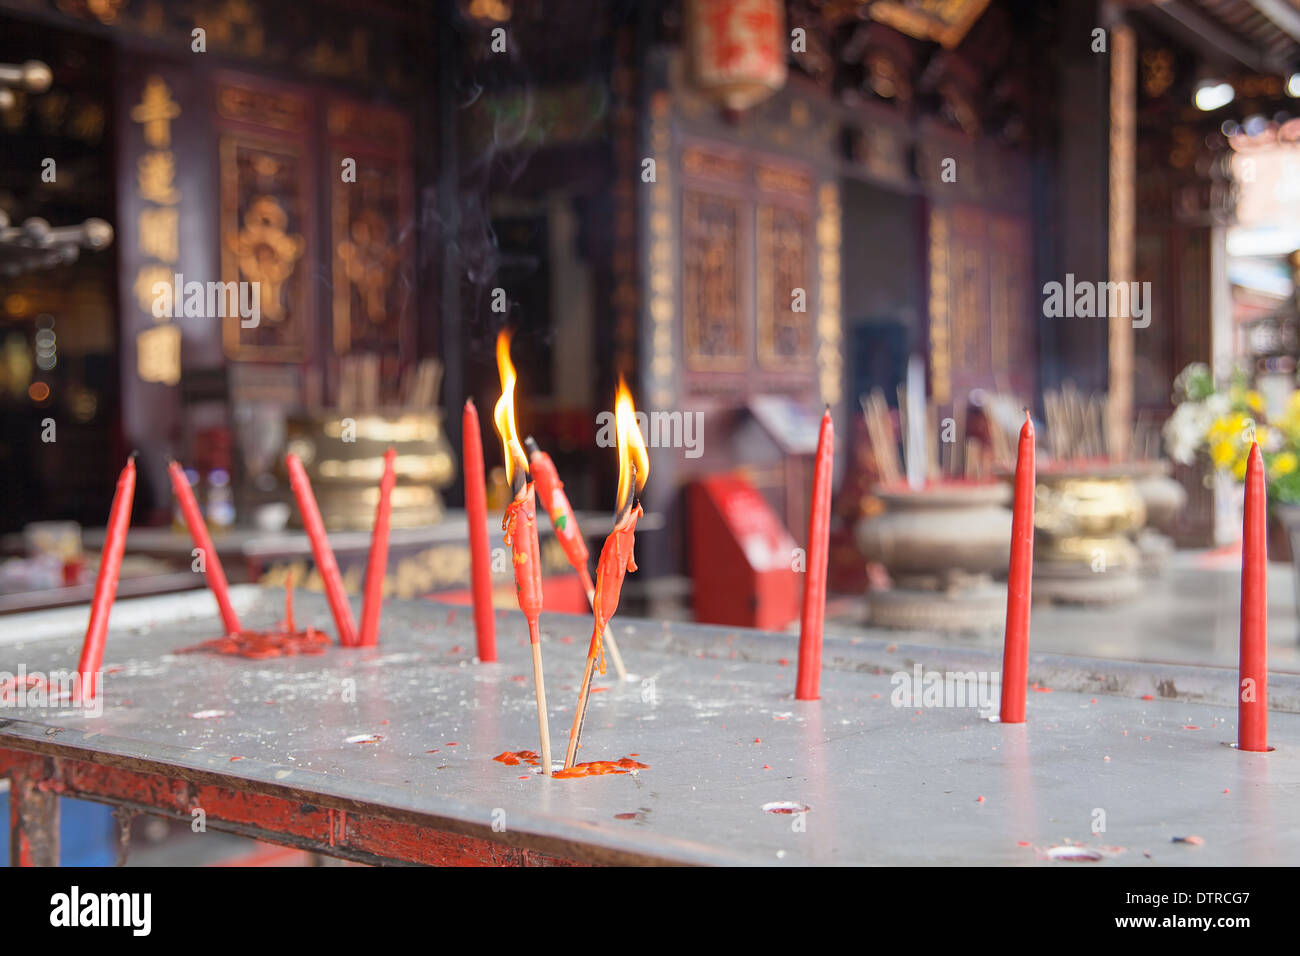 Burning Red Candles as Offerings to Chinese Gods at Chinese Temple in Malacca Malaysia Stock Photo